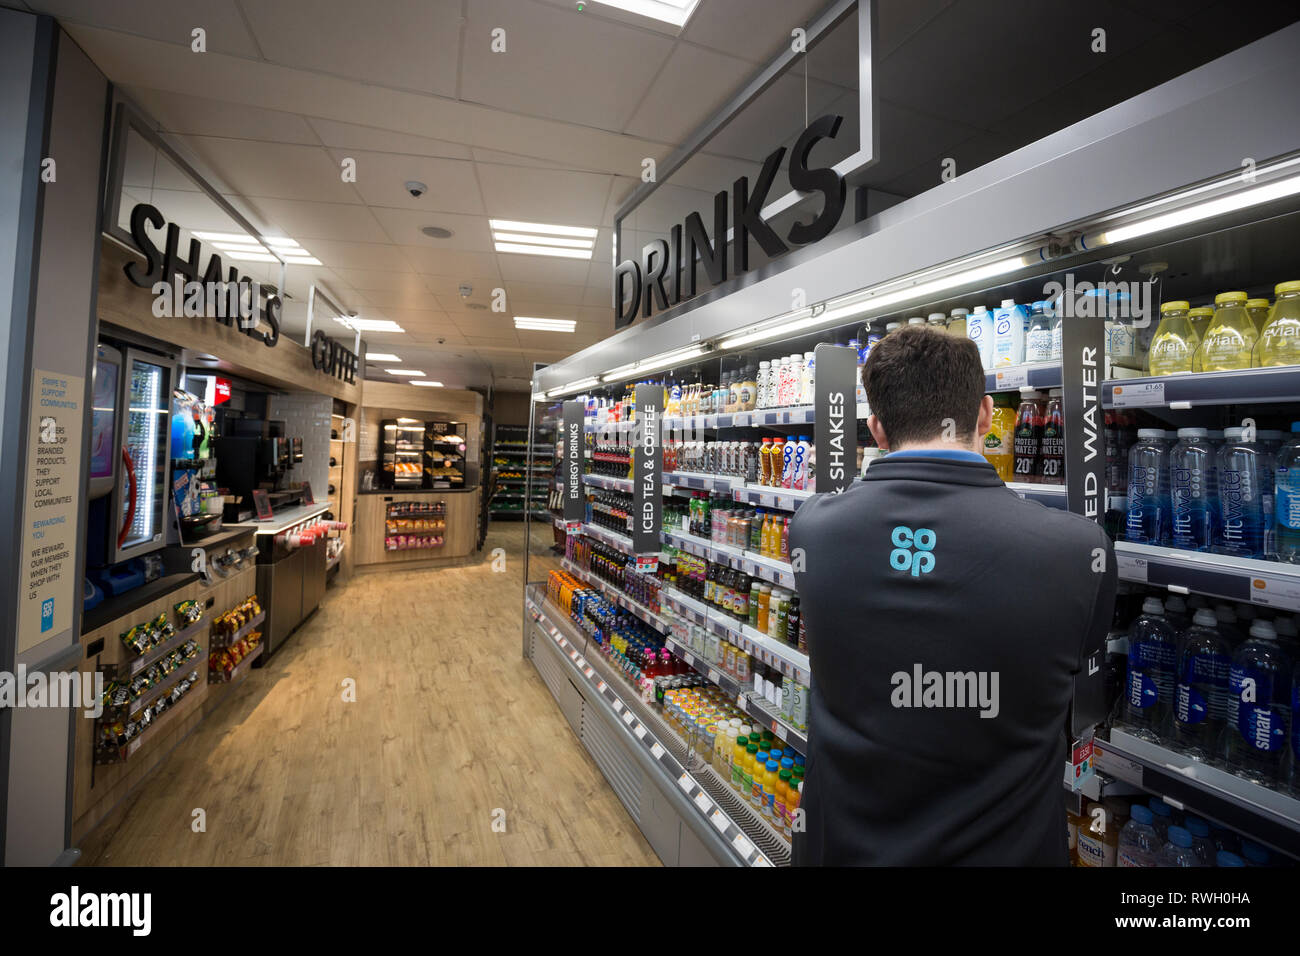 Interior of a co-op shop Stock Photo